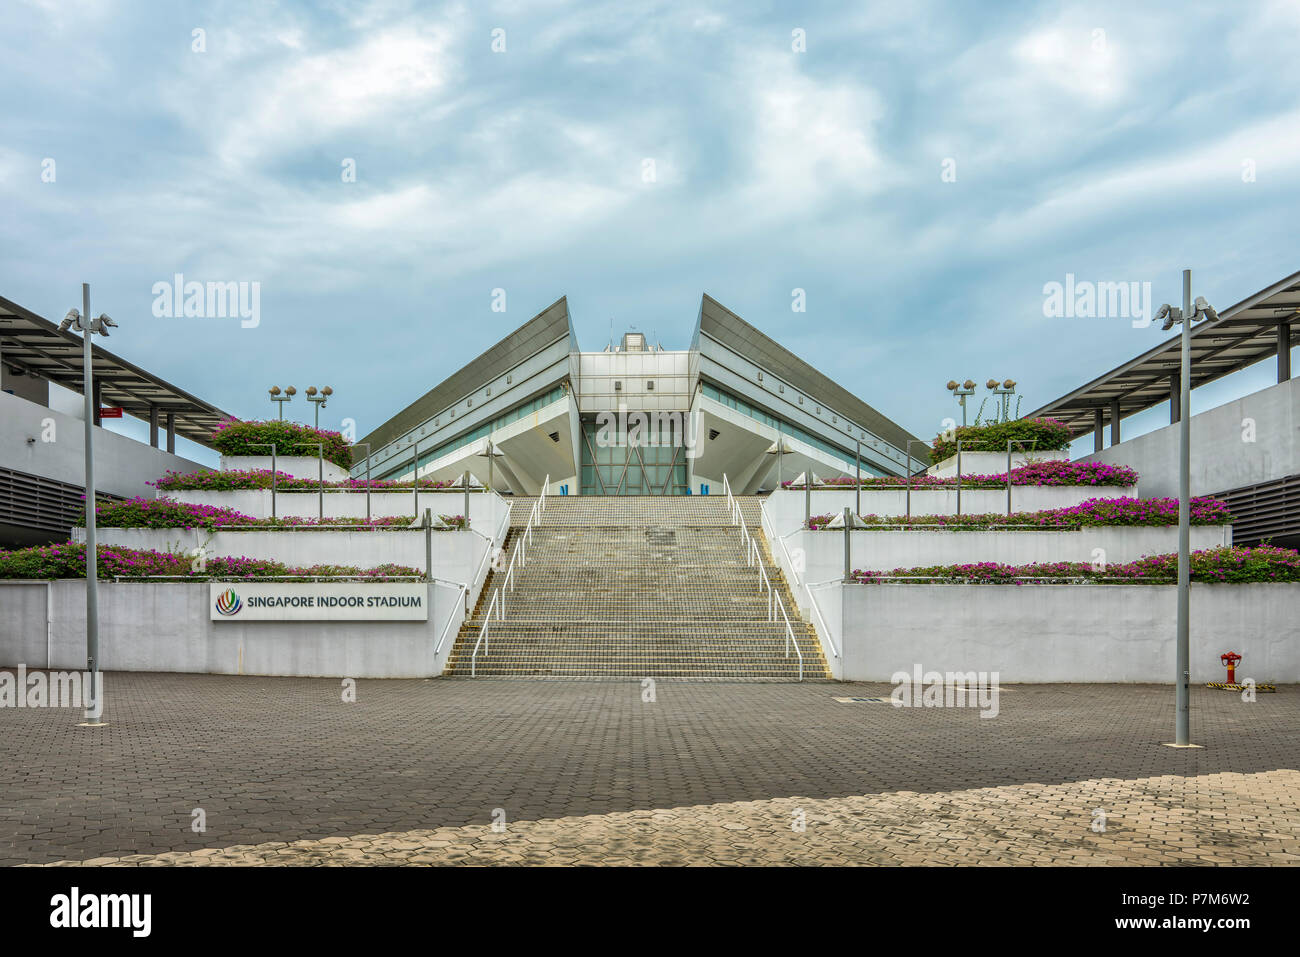 Singapore  - July 3, 2018: Indoor stadium entrance with stairs and sign in view Stock Photo